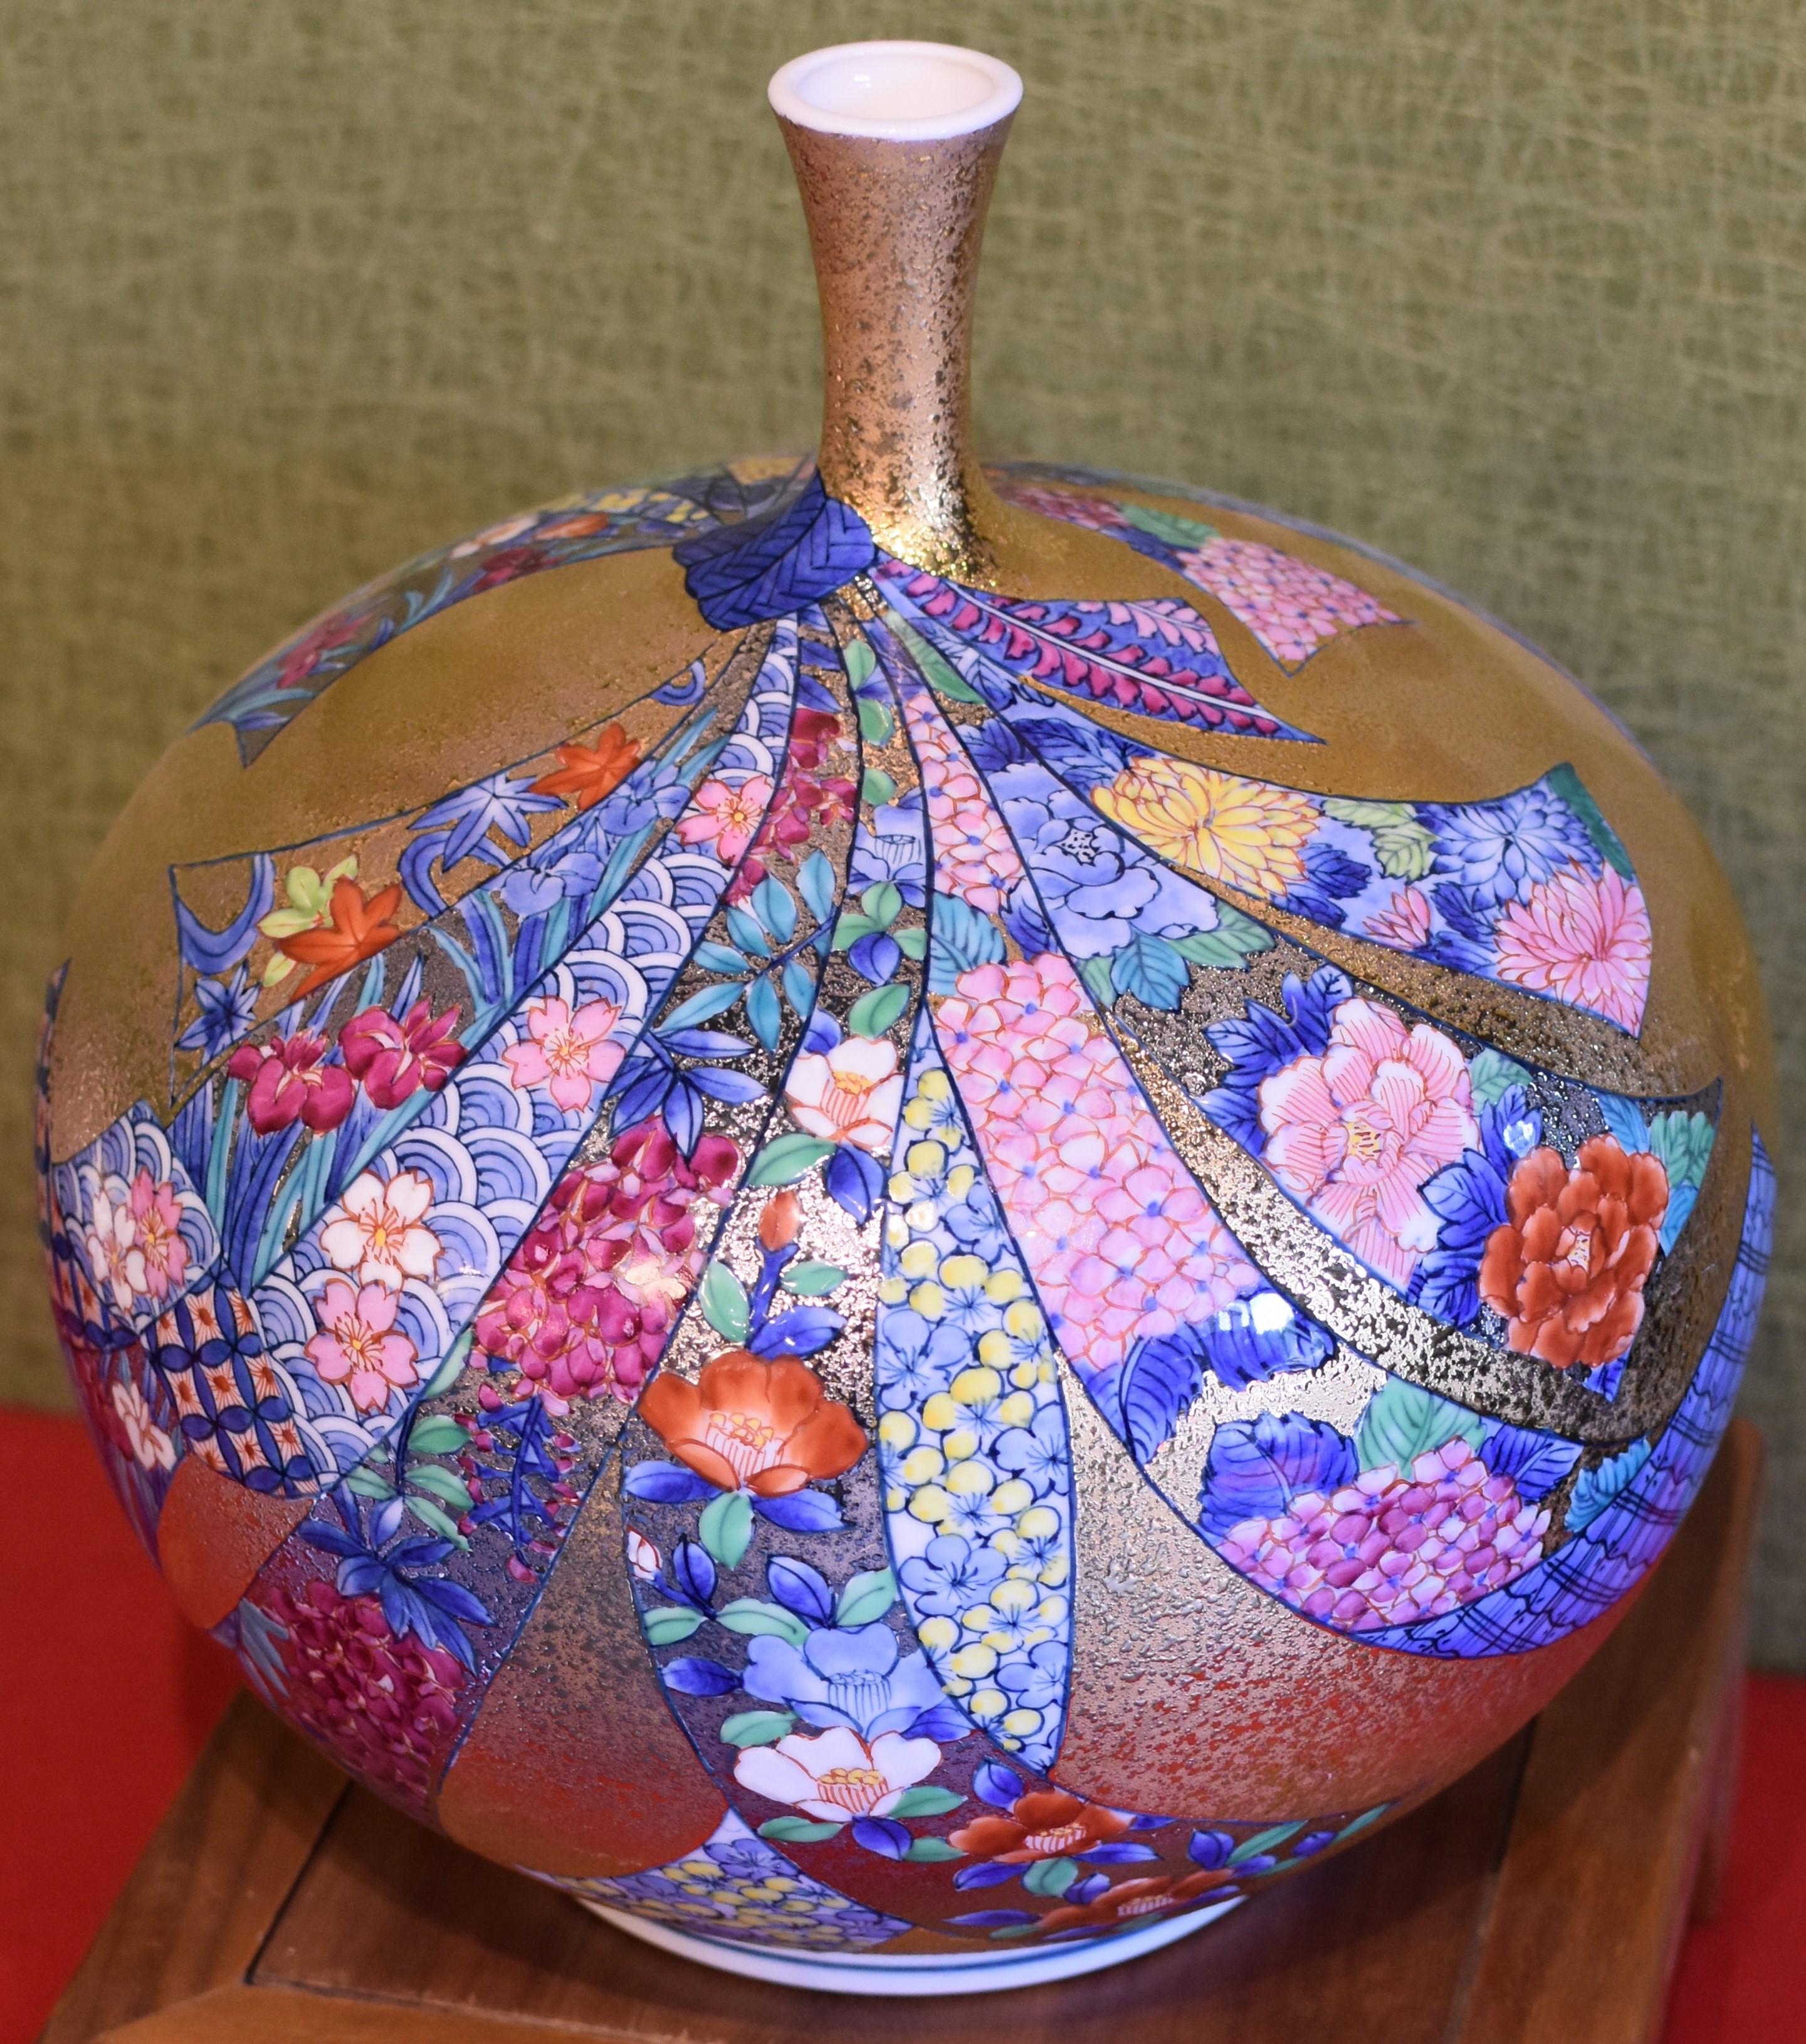 Exquisite Imari contemporary gilded porcelain vase, intricately hand-painted on an attractively shaped body. This piece is a masterpiece by acclaimed and award-winning master porcelain artist from the Imari-Arita region of Japan.

The vase features